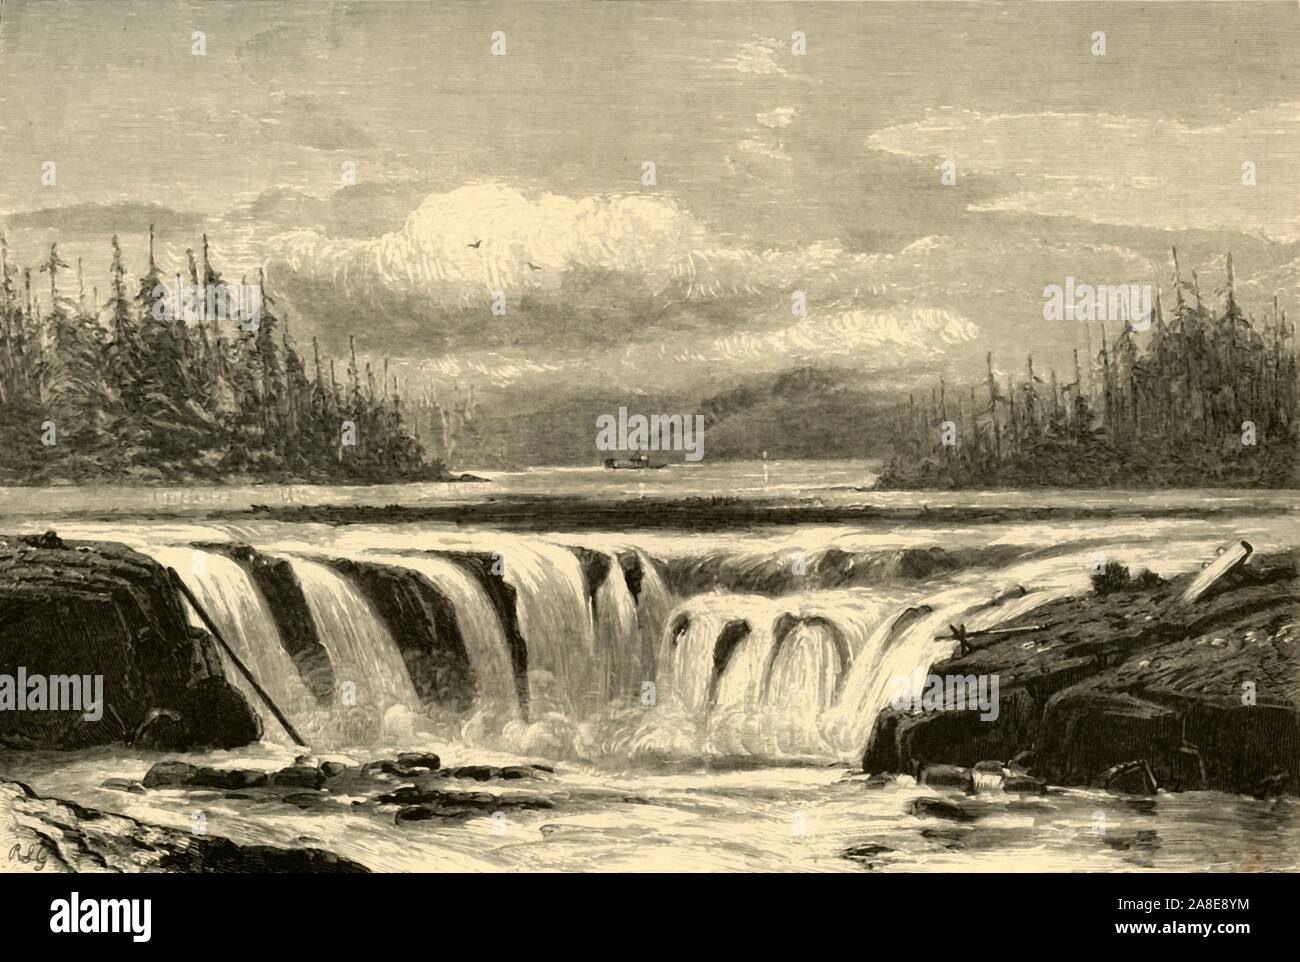 'Falls of the Willamette', 1872. Waterfall in Oregon, USA: 'The falls of this stream [the Willamette River] are justly celebrated for their beauty. The river, which is generally about a mile wide, narrows suddenly near Oregon City, as if preparing for its tremendous leap. The rocks on each side are of frowning basalt, of a deep black, rendered more intense by the foaming waters. By the action of the stream - the current being strongest in the centre - the falls have been worn into a horseshoe form, the two sides being so close that one can throw a stone to the other shore. The water, rushing w Stock Photo